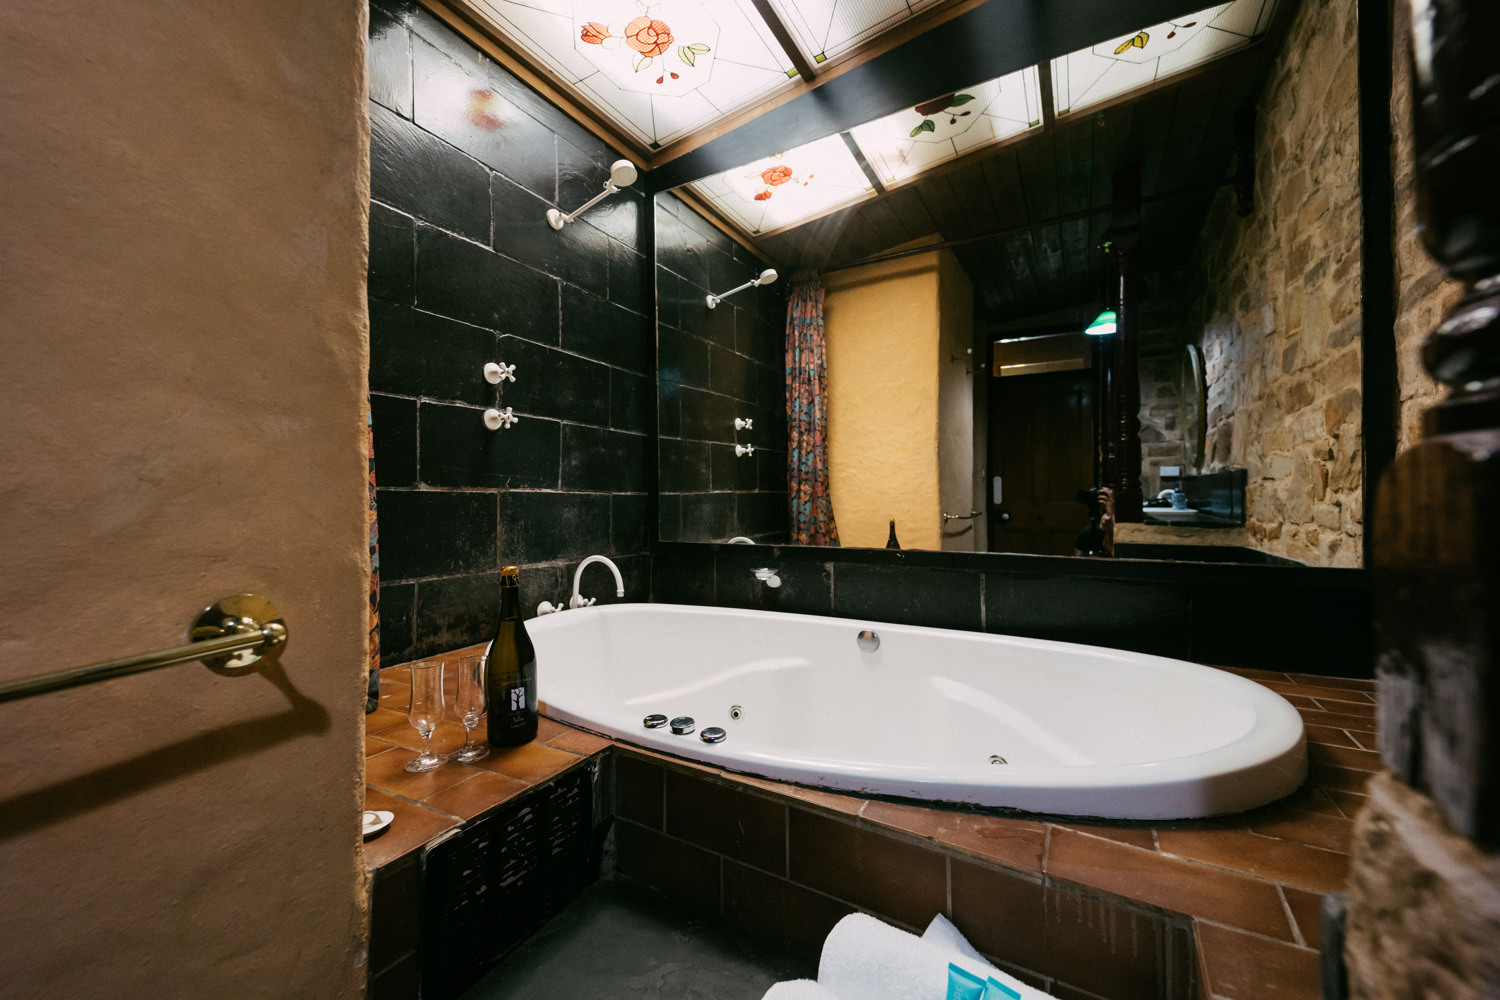 Mintaro Hideaway Clare Valley Holiday Accommodation - The Scholar bathroom with large oval 2 person spa bath